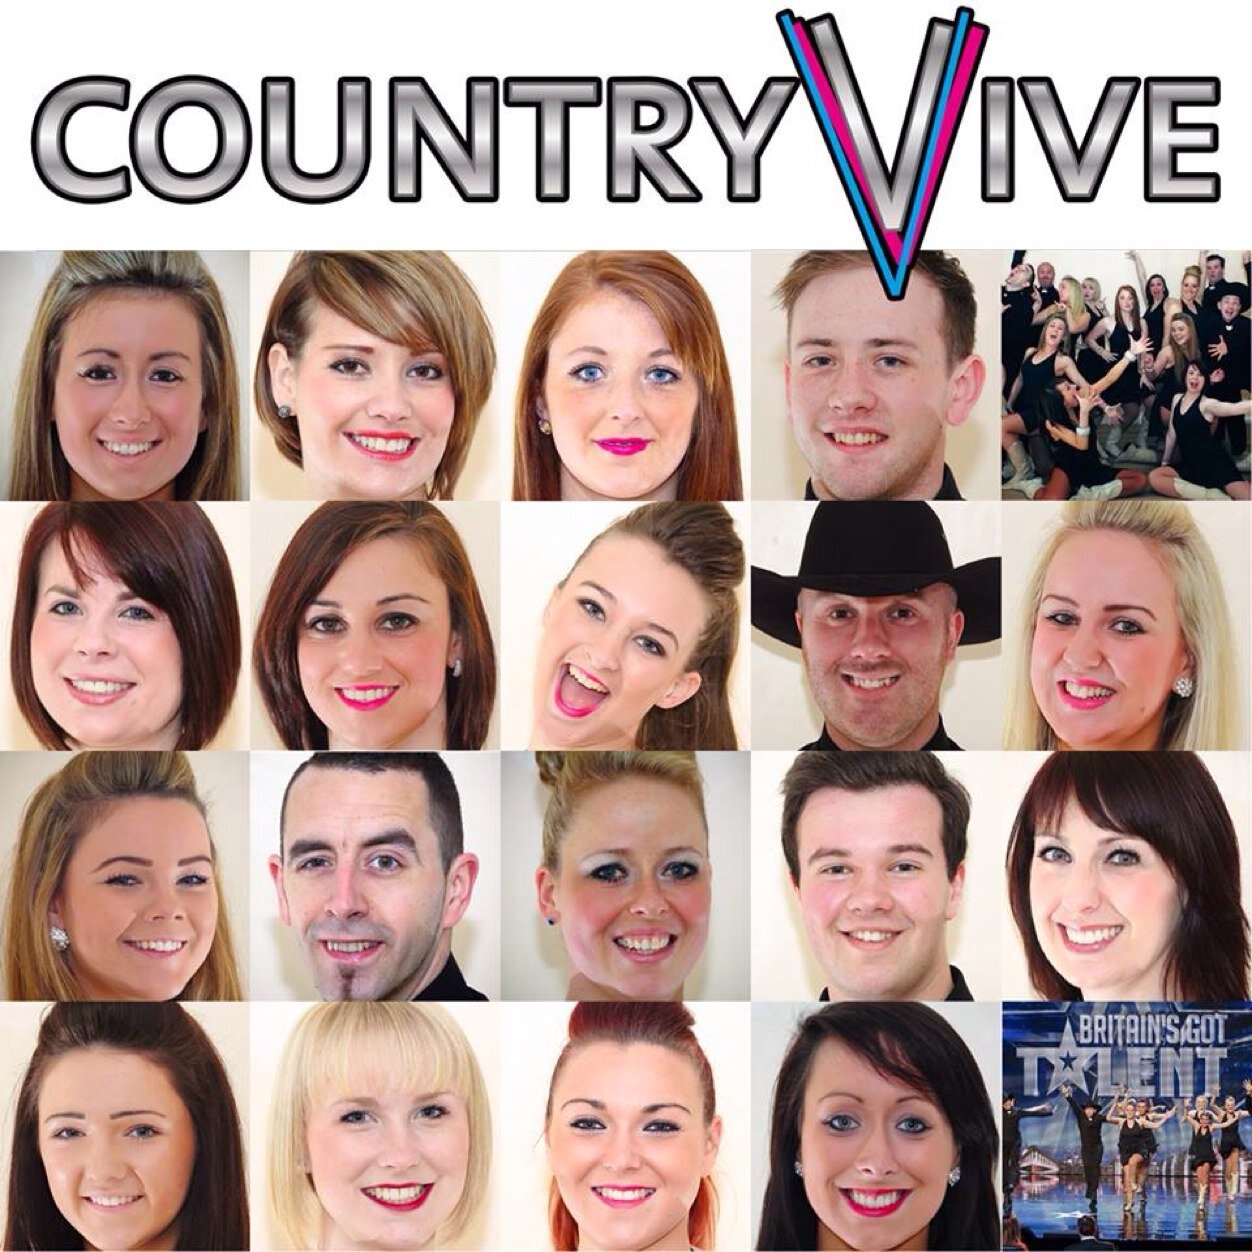 CountryVive was an act on Britain's Got Talent 2014. Their performance aired on the first show which lead to a spot in the semi finals of BGT